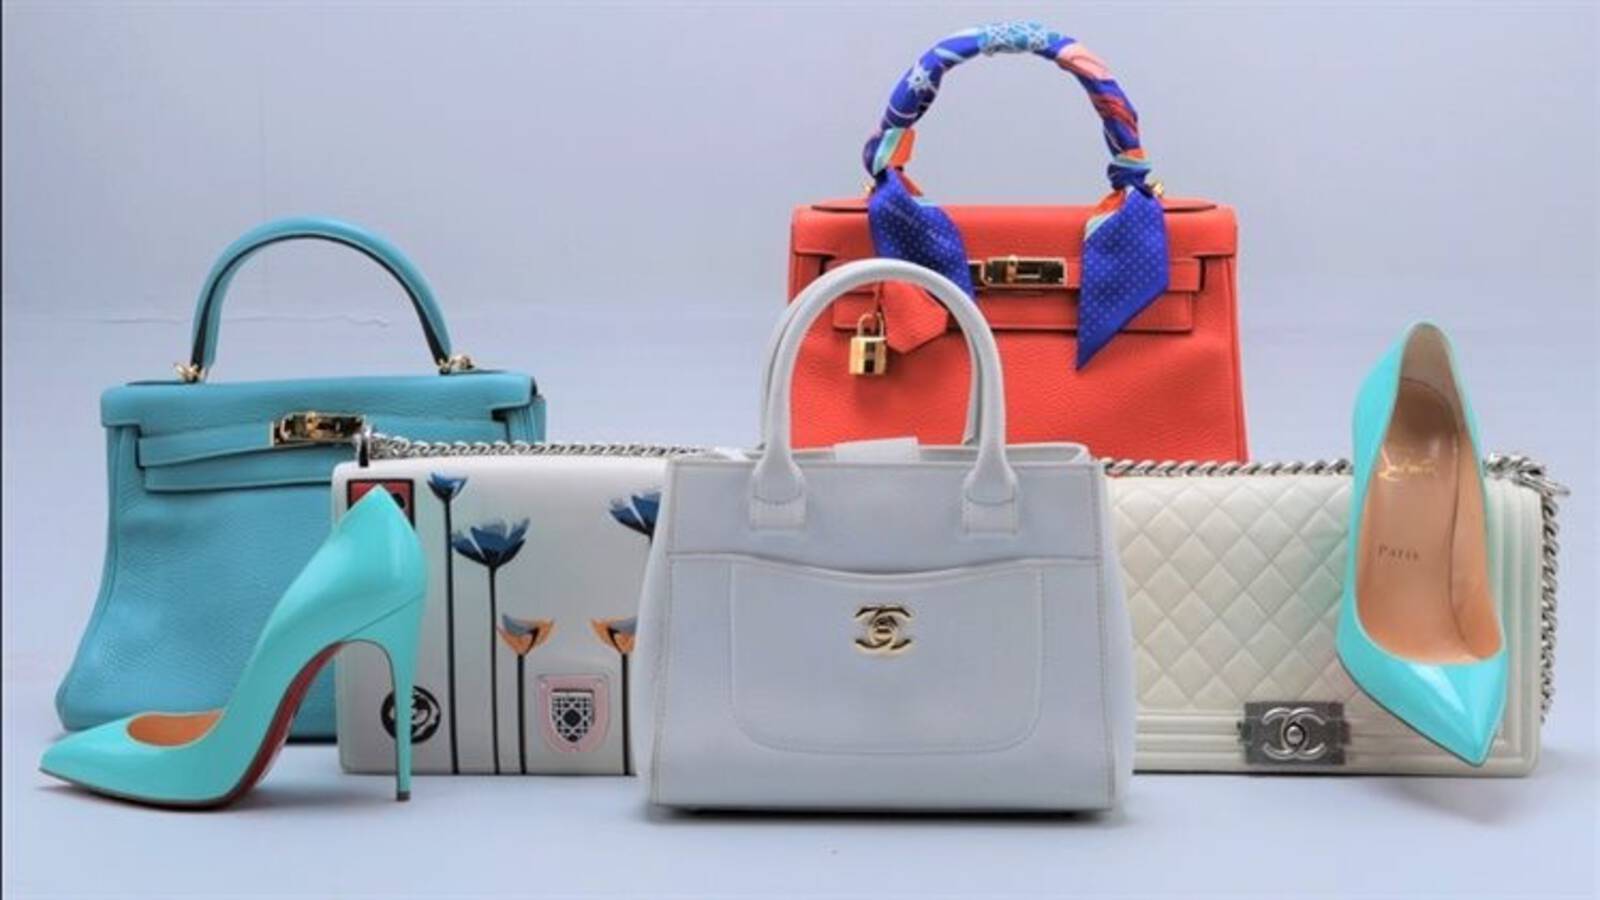 Hermes and Chanel bags raise €232,000 at public prosecutor auction -  